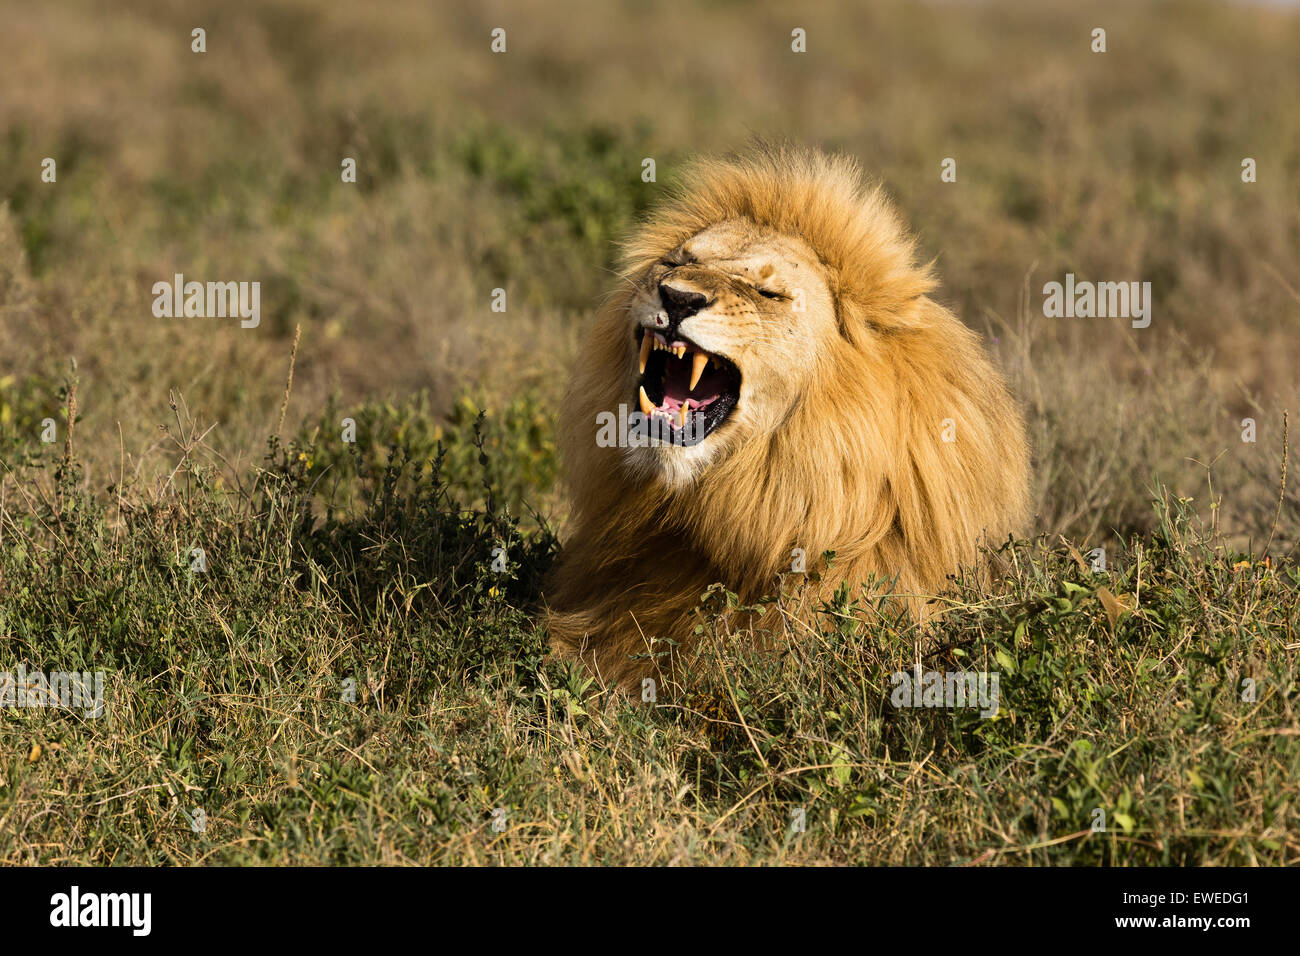 A Lion (Panthera leo) rests in long grass in the Serengeti Tanzania Stock Photo